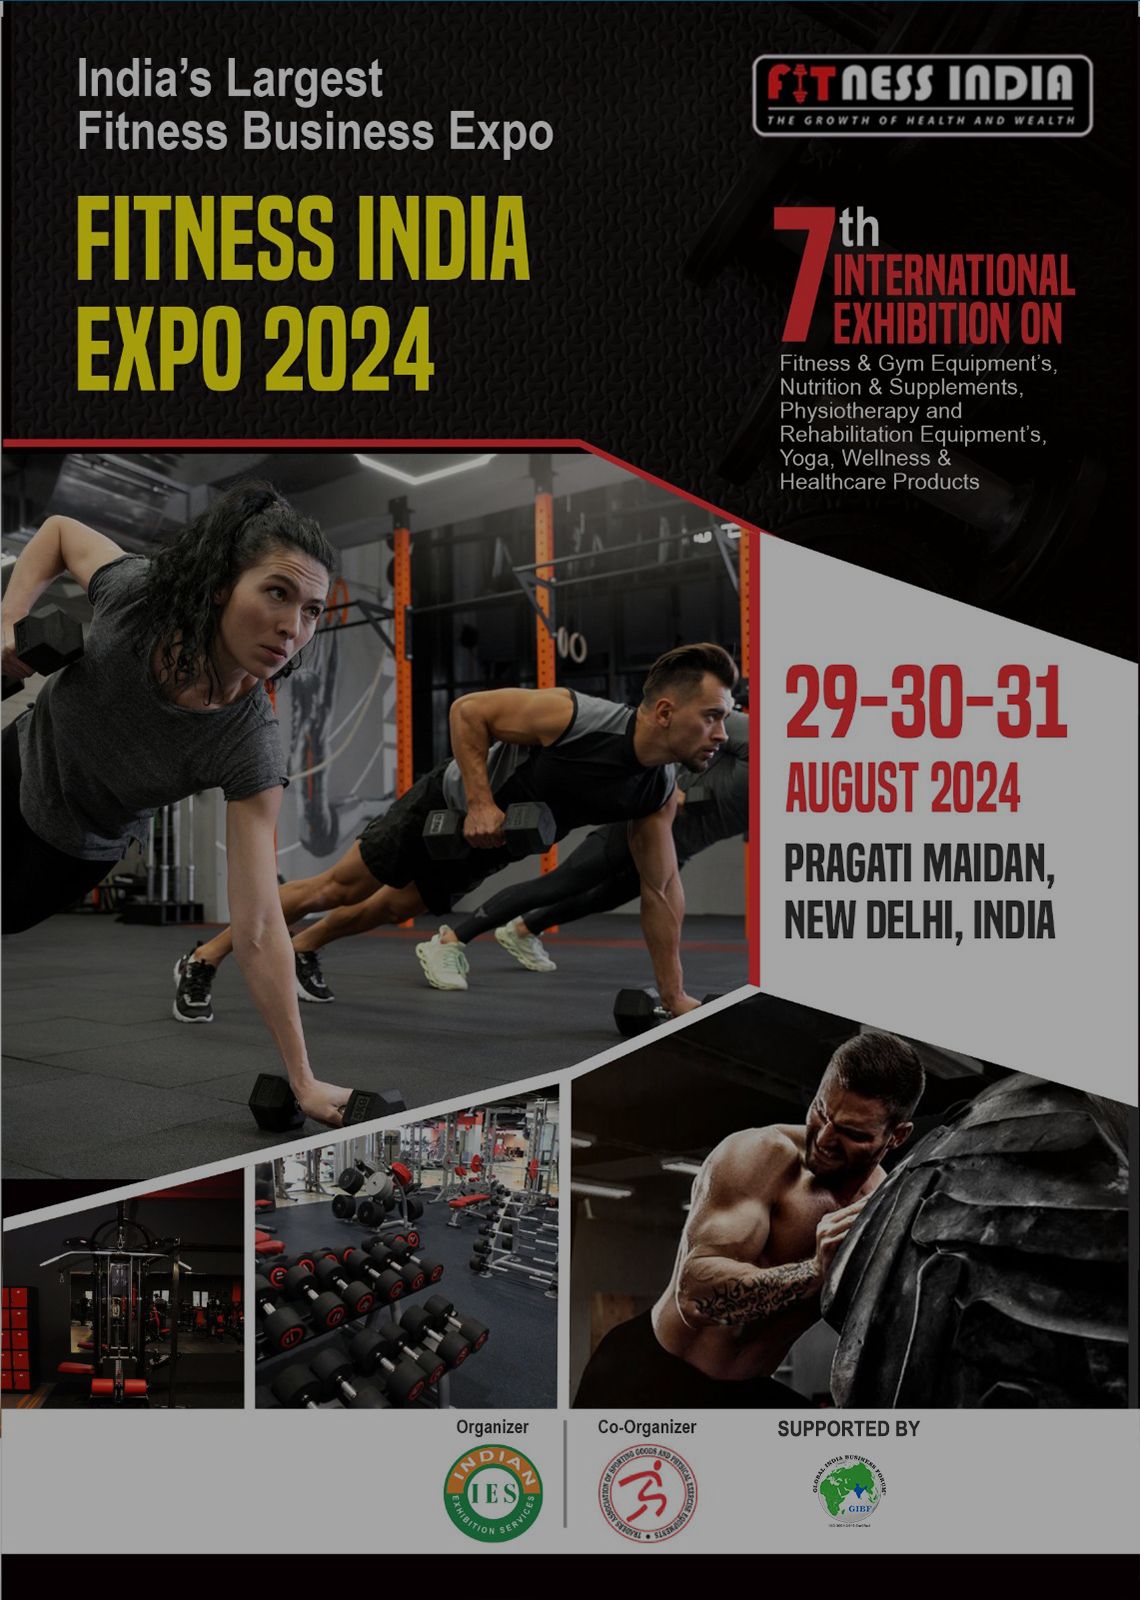 GIBF Collabrative Upcoming Event - Fitness India Expo 2024